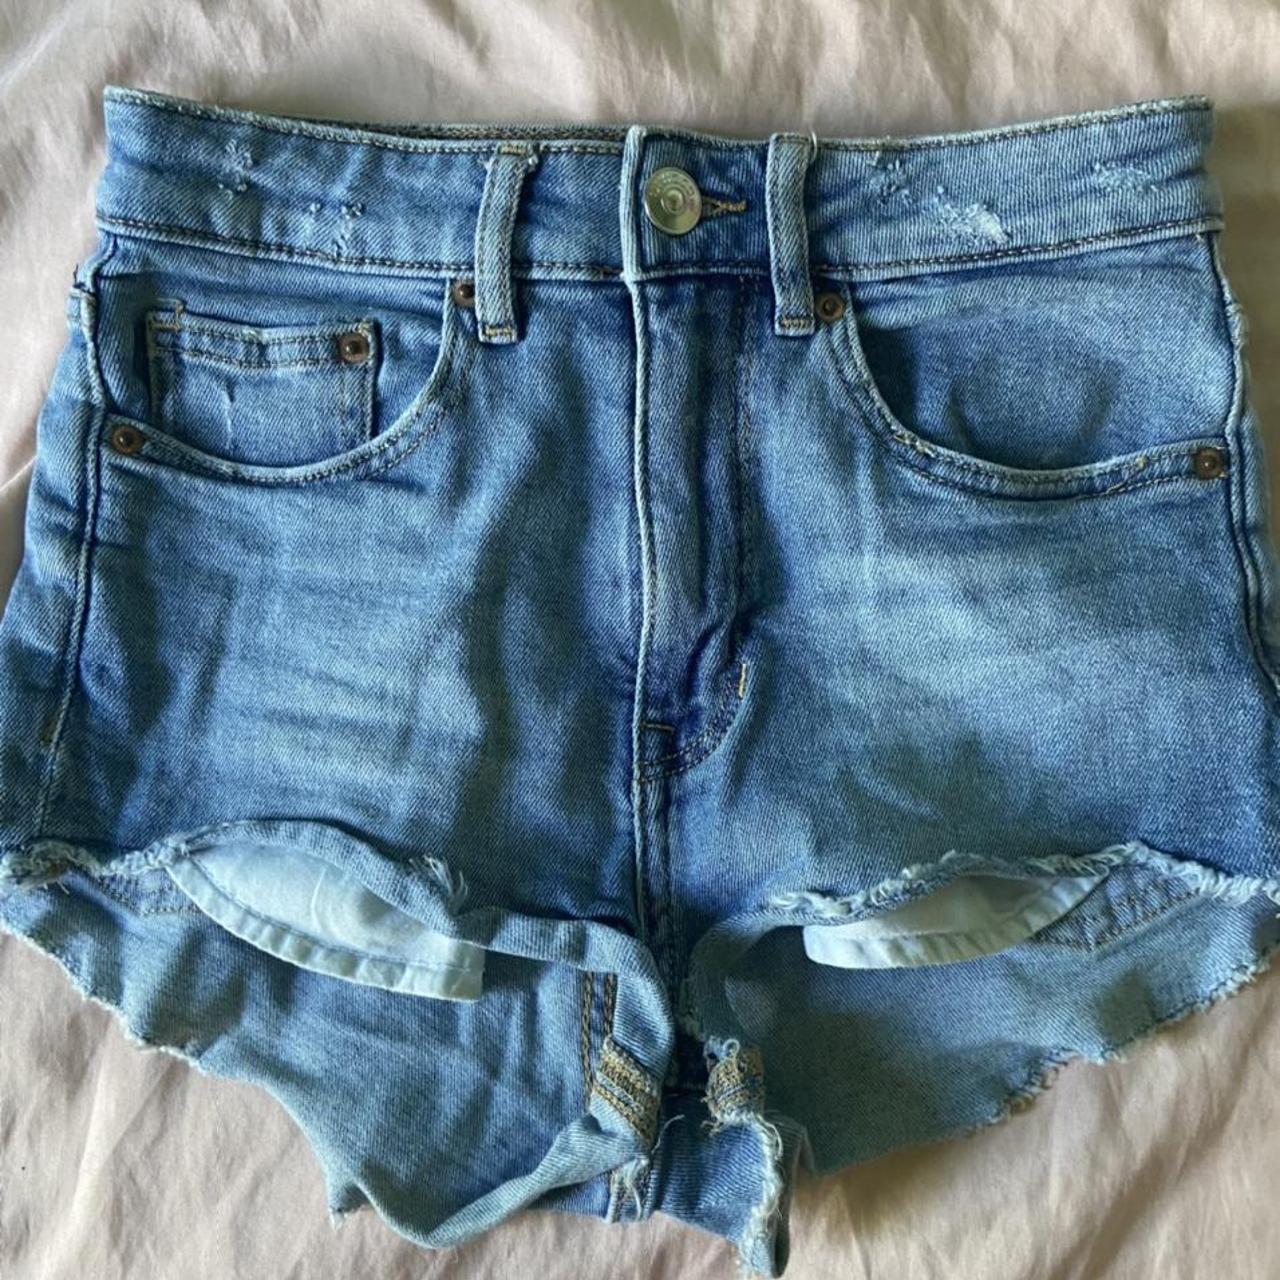 Vetinee Cute Hot Denim Shorts for Women Mid Rise Stretchy Frayed Hem Jeans  Shorts Turquoise Blue Size S Fit Size 4 Size 6 - Walmart.com